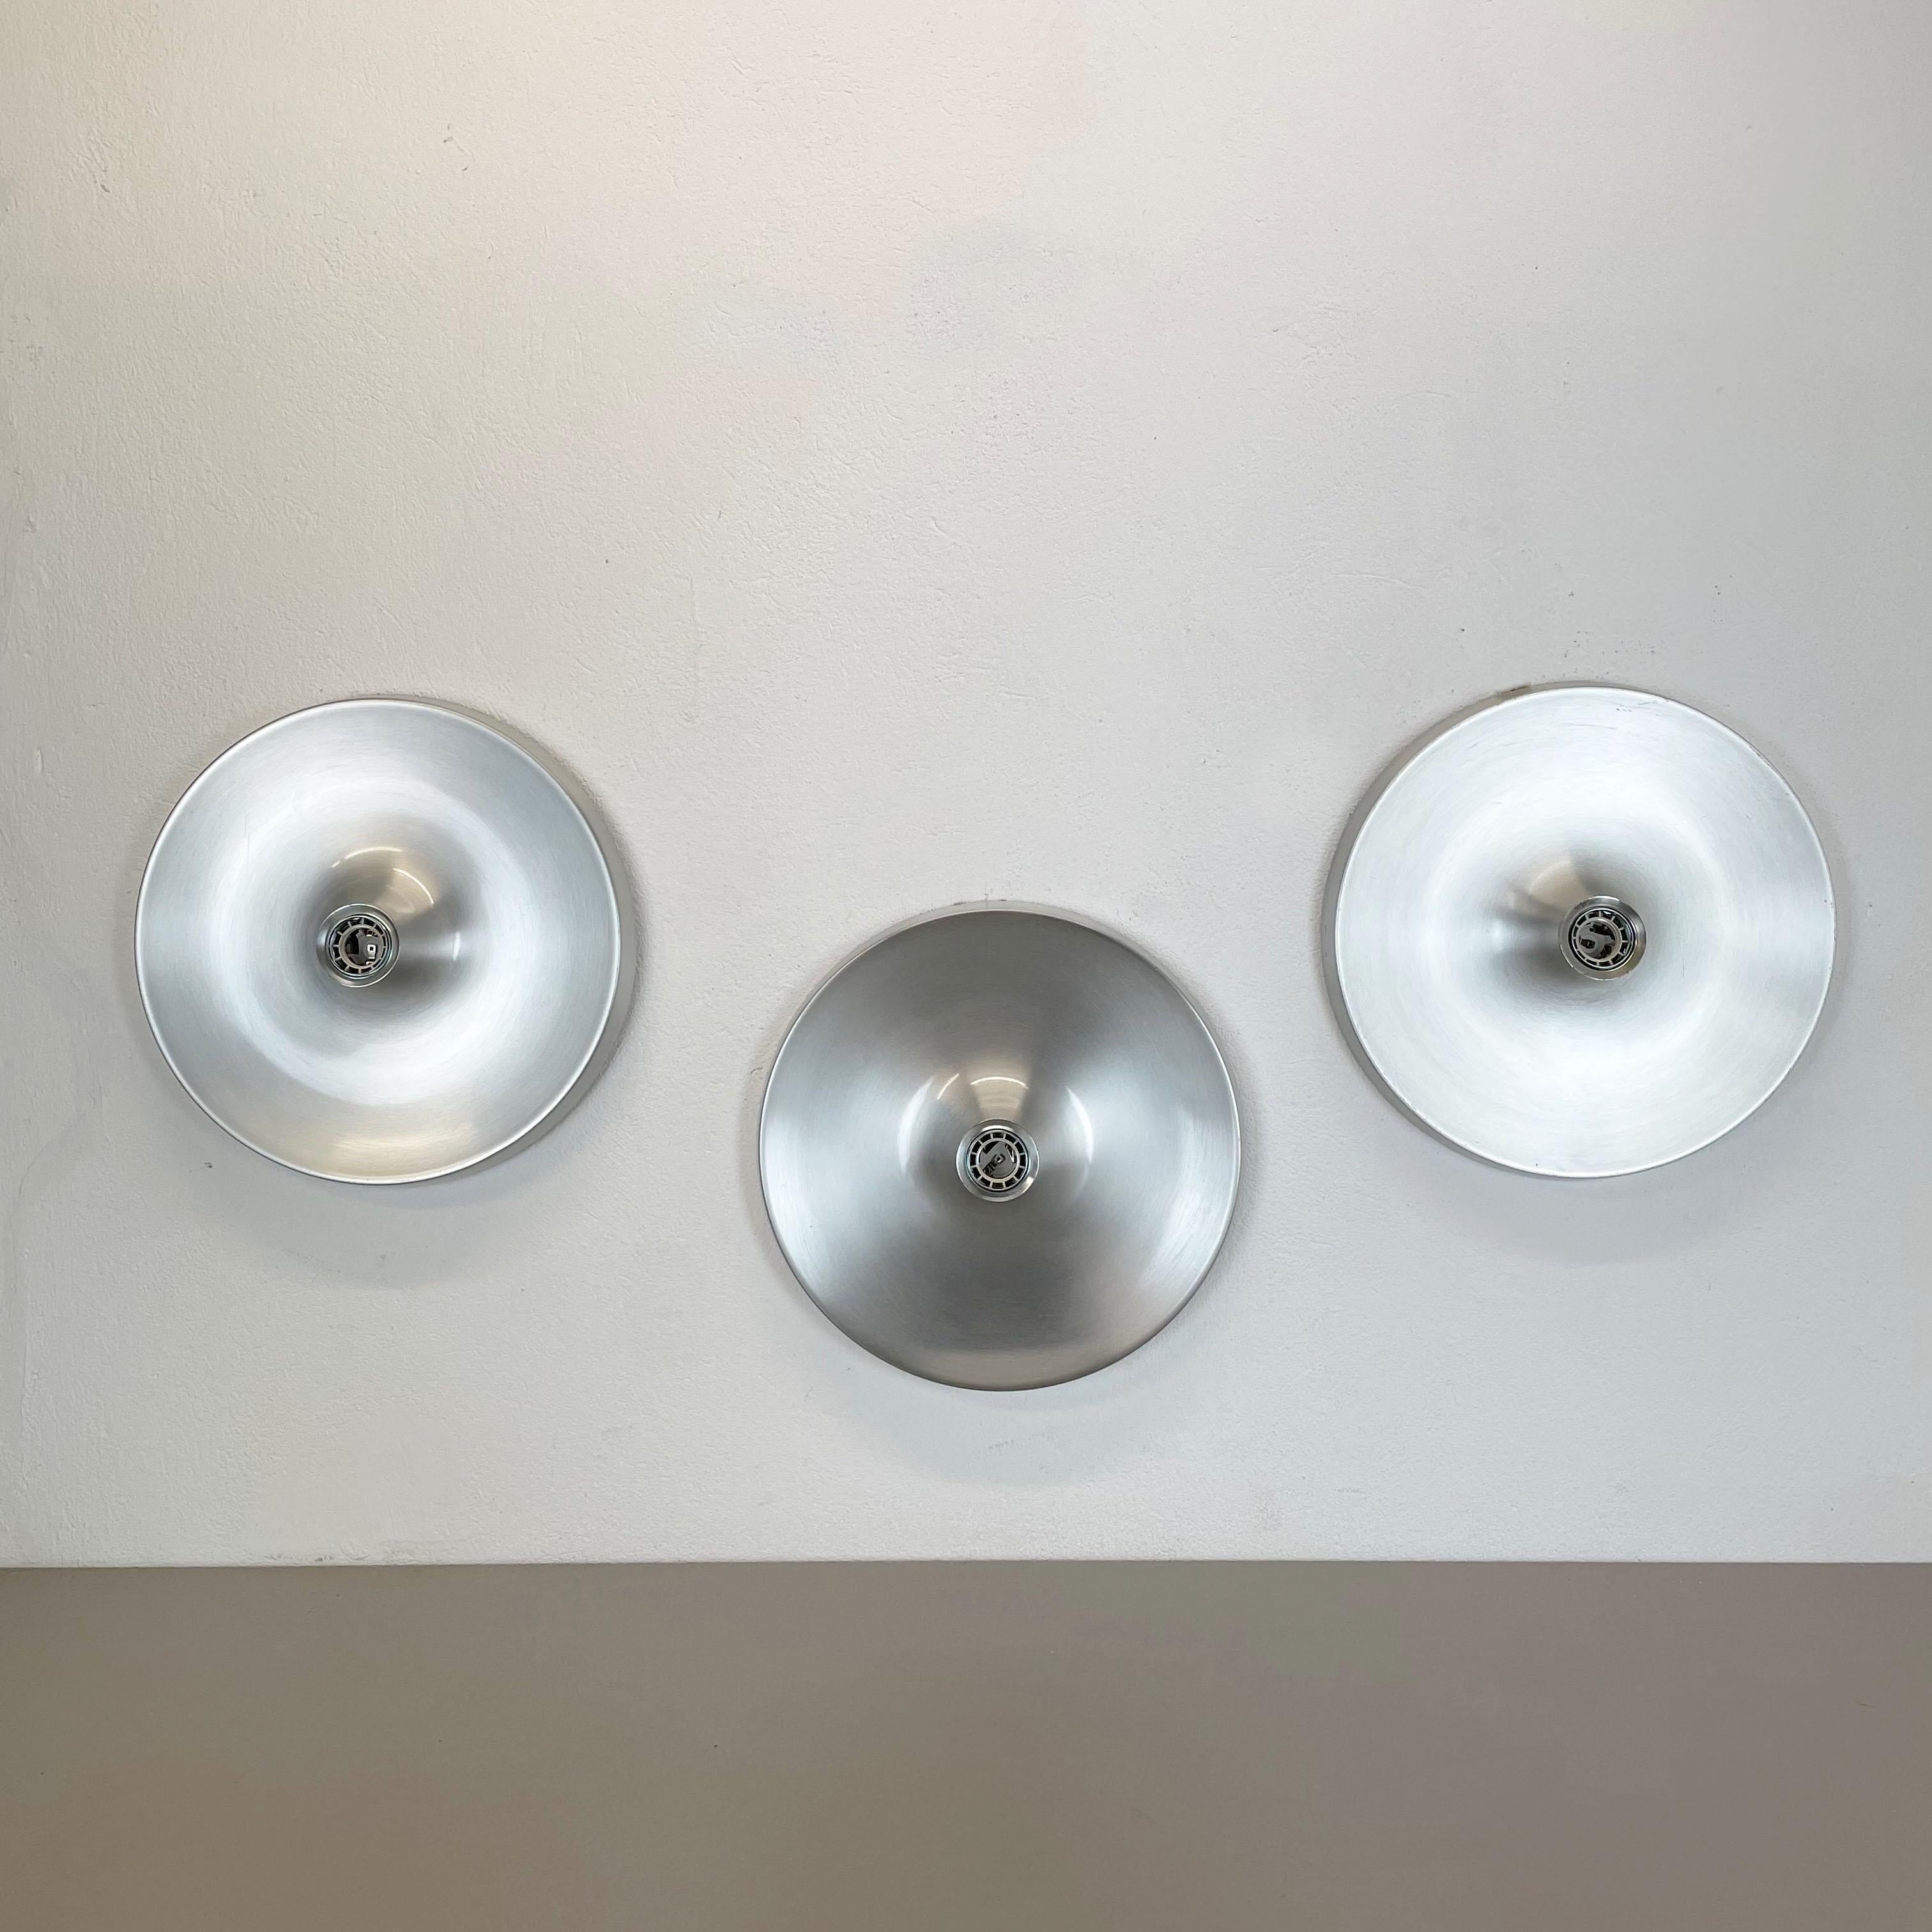 Article:

Set of three wall light sconces



Origin:

Germany


Producer:

Honsel



Age:

1960s


Set of two original 1960s modernist German wall light made of solid metal aluminium. All lights are in the original state with